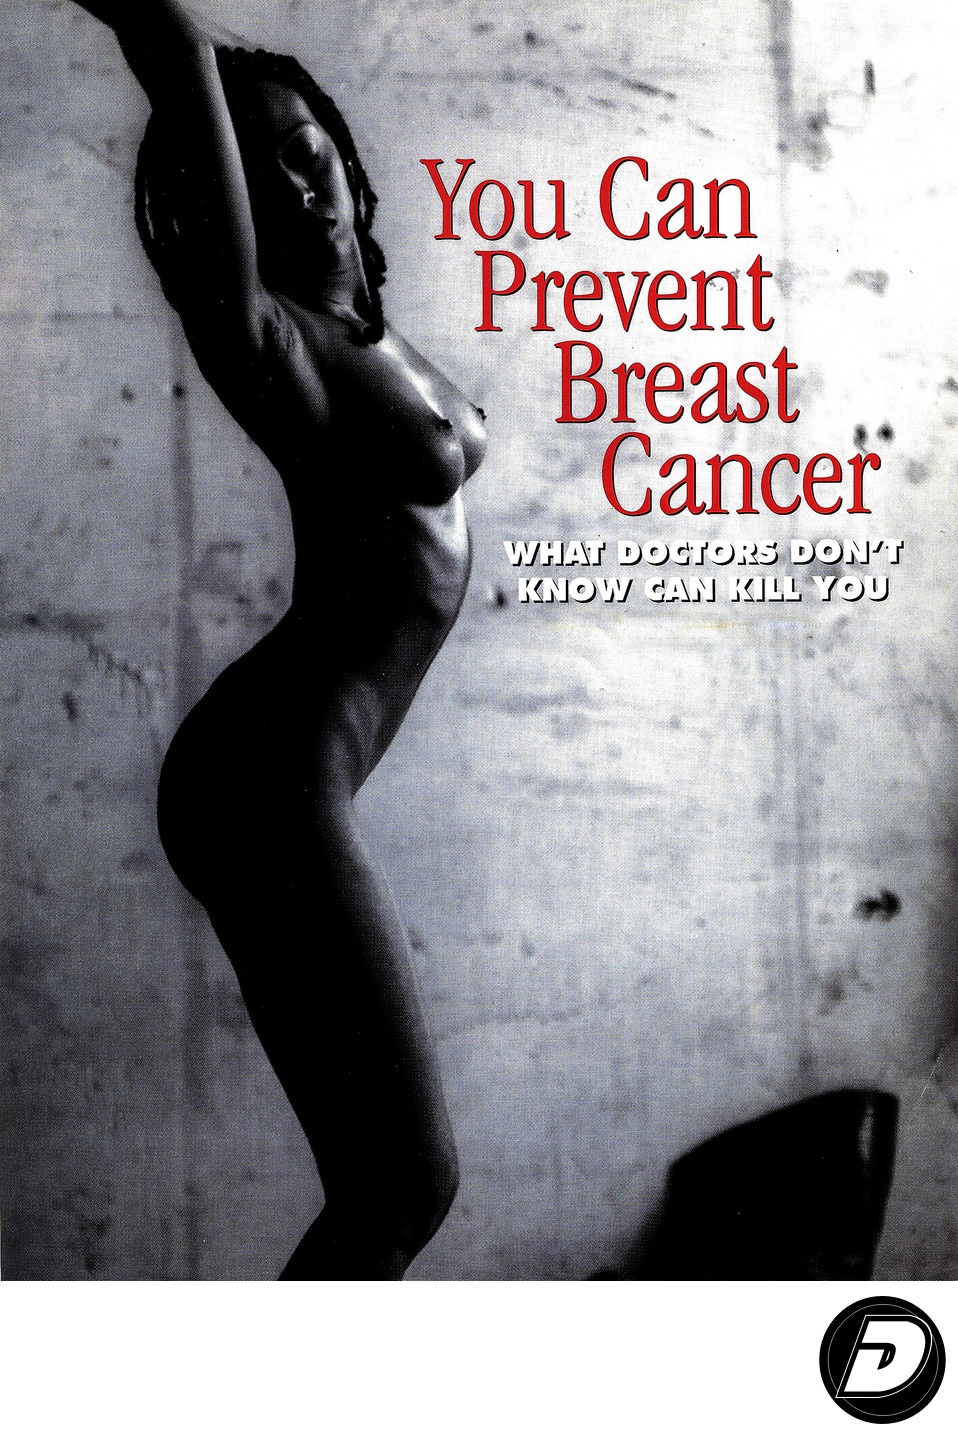 Breast Cancer Ad campaign photographer